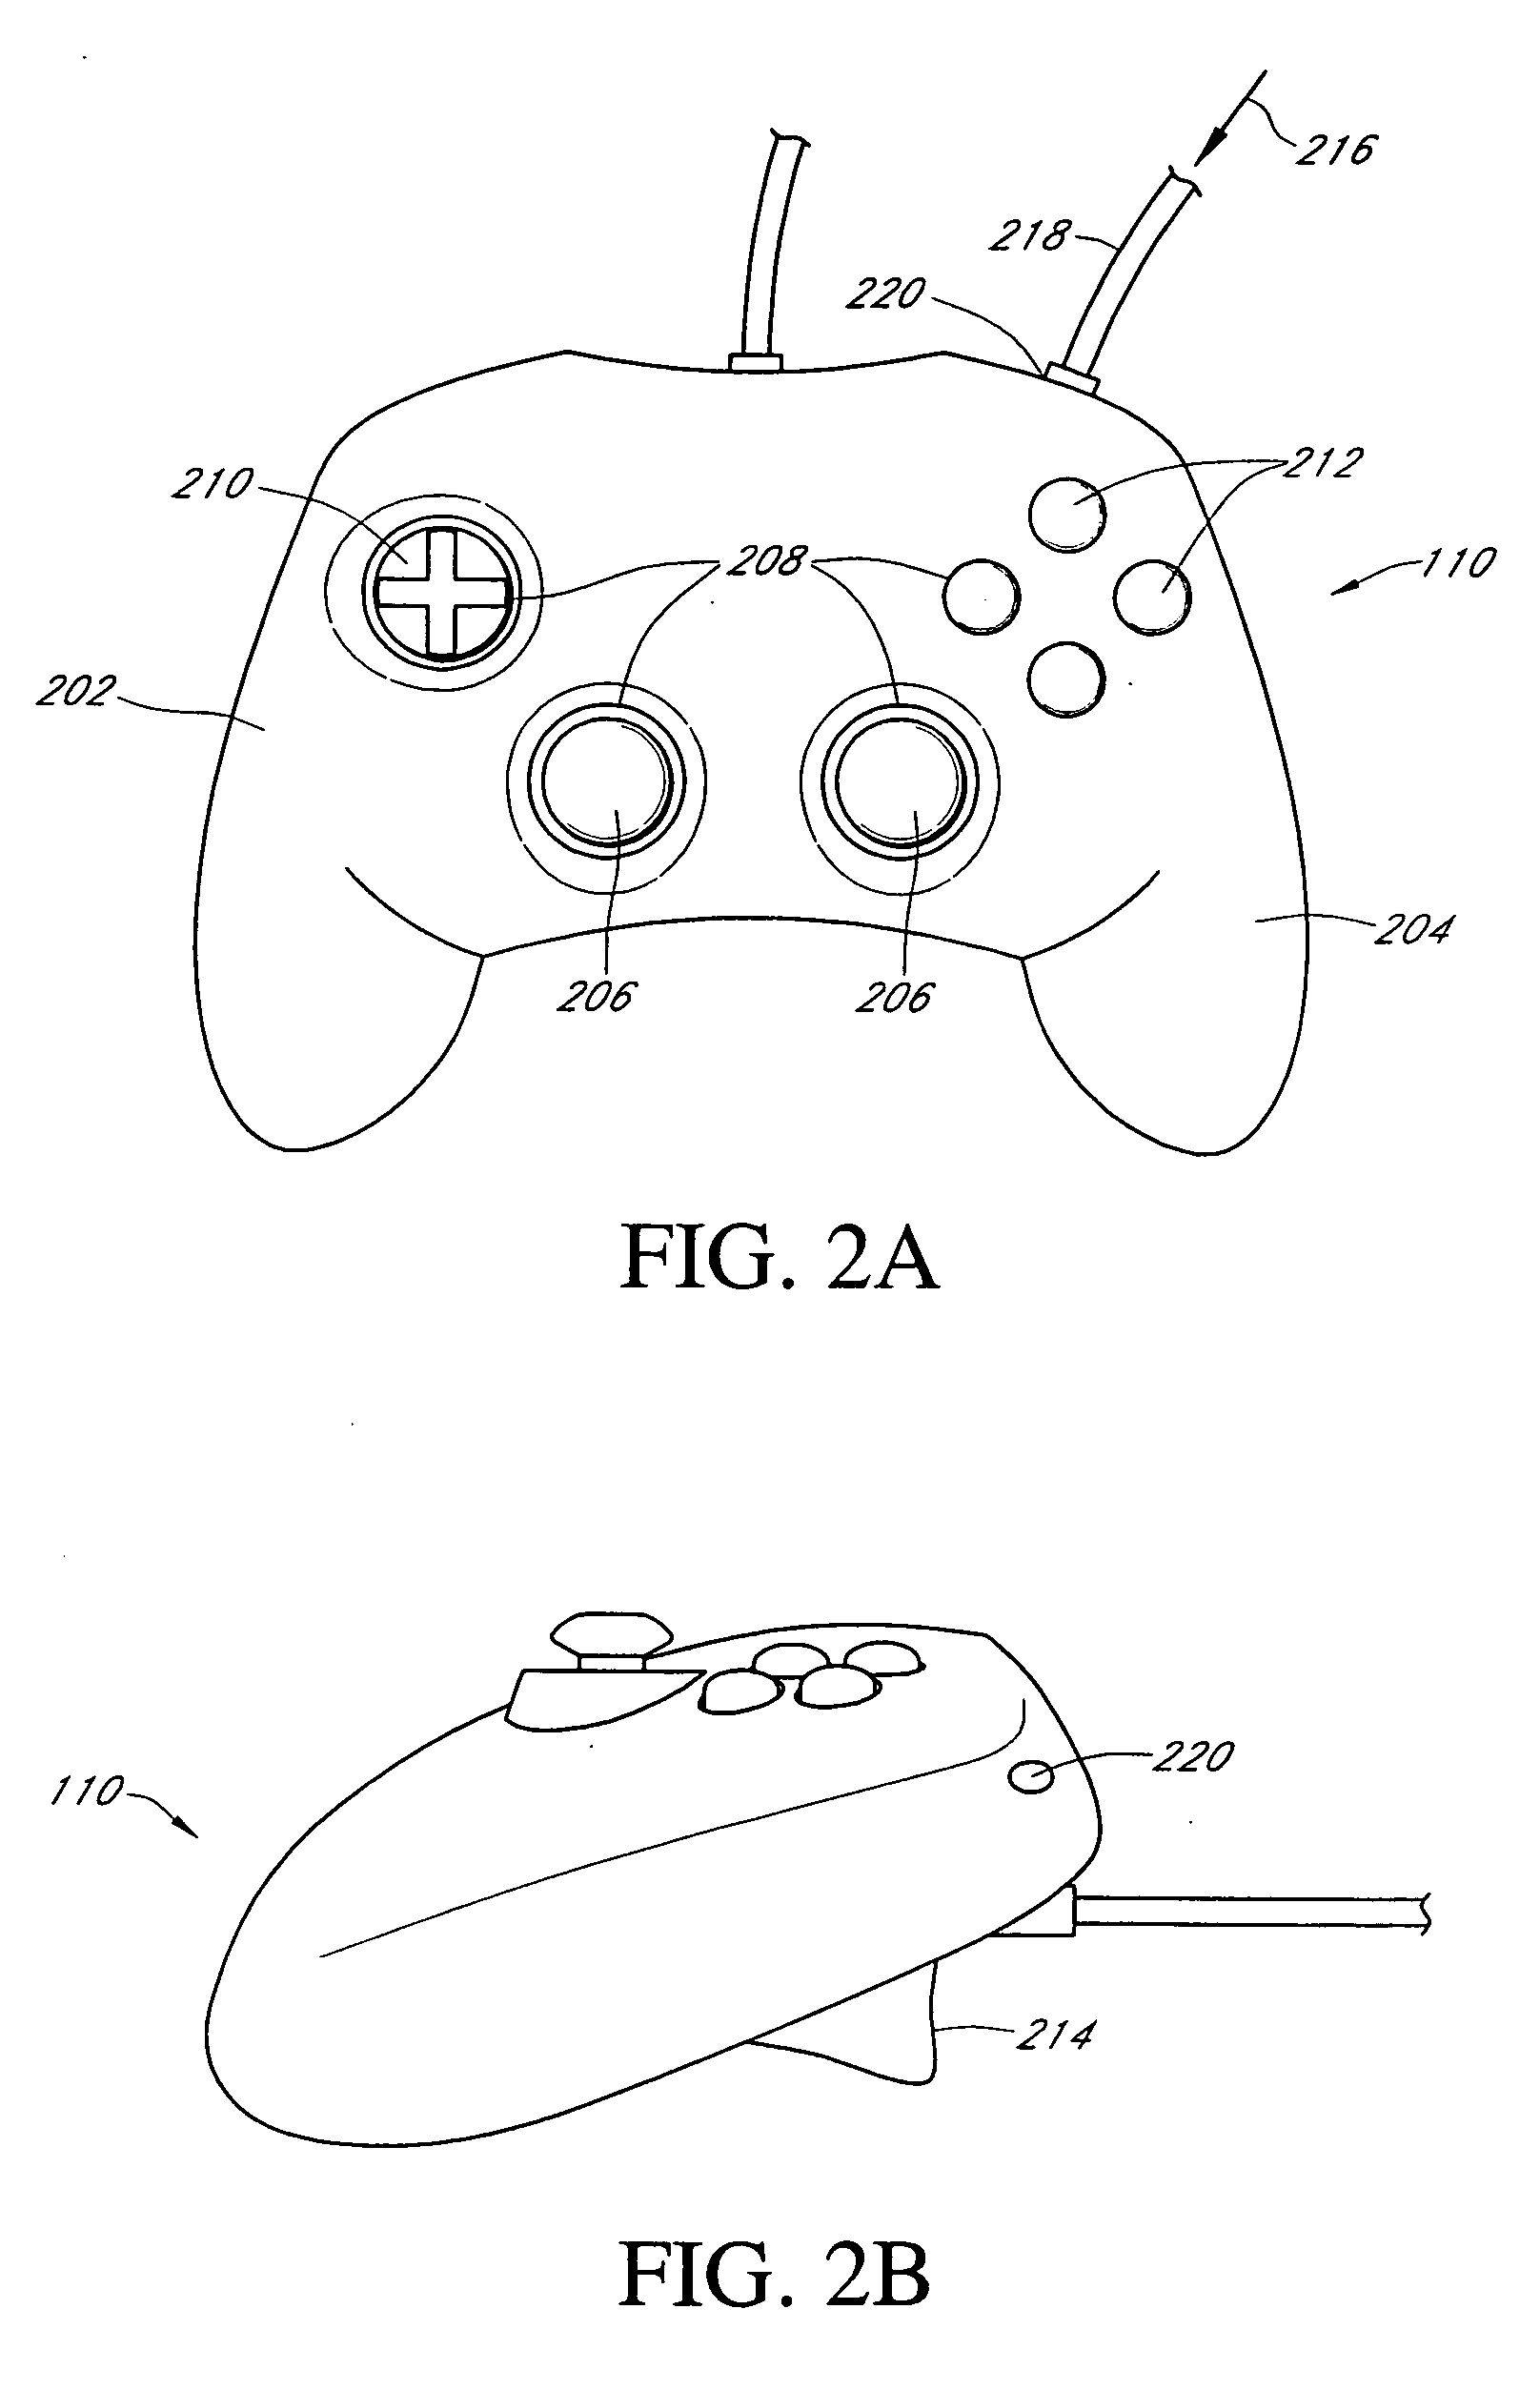 System and method for interfacing a simulation device with a gaming device